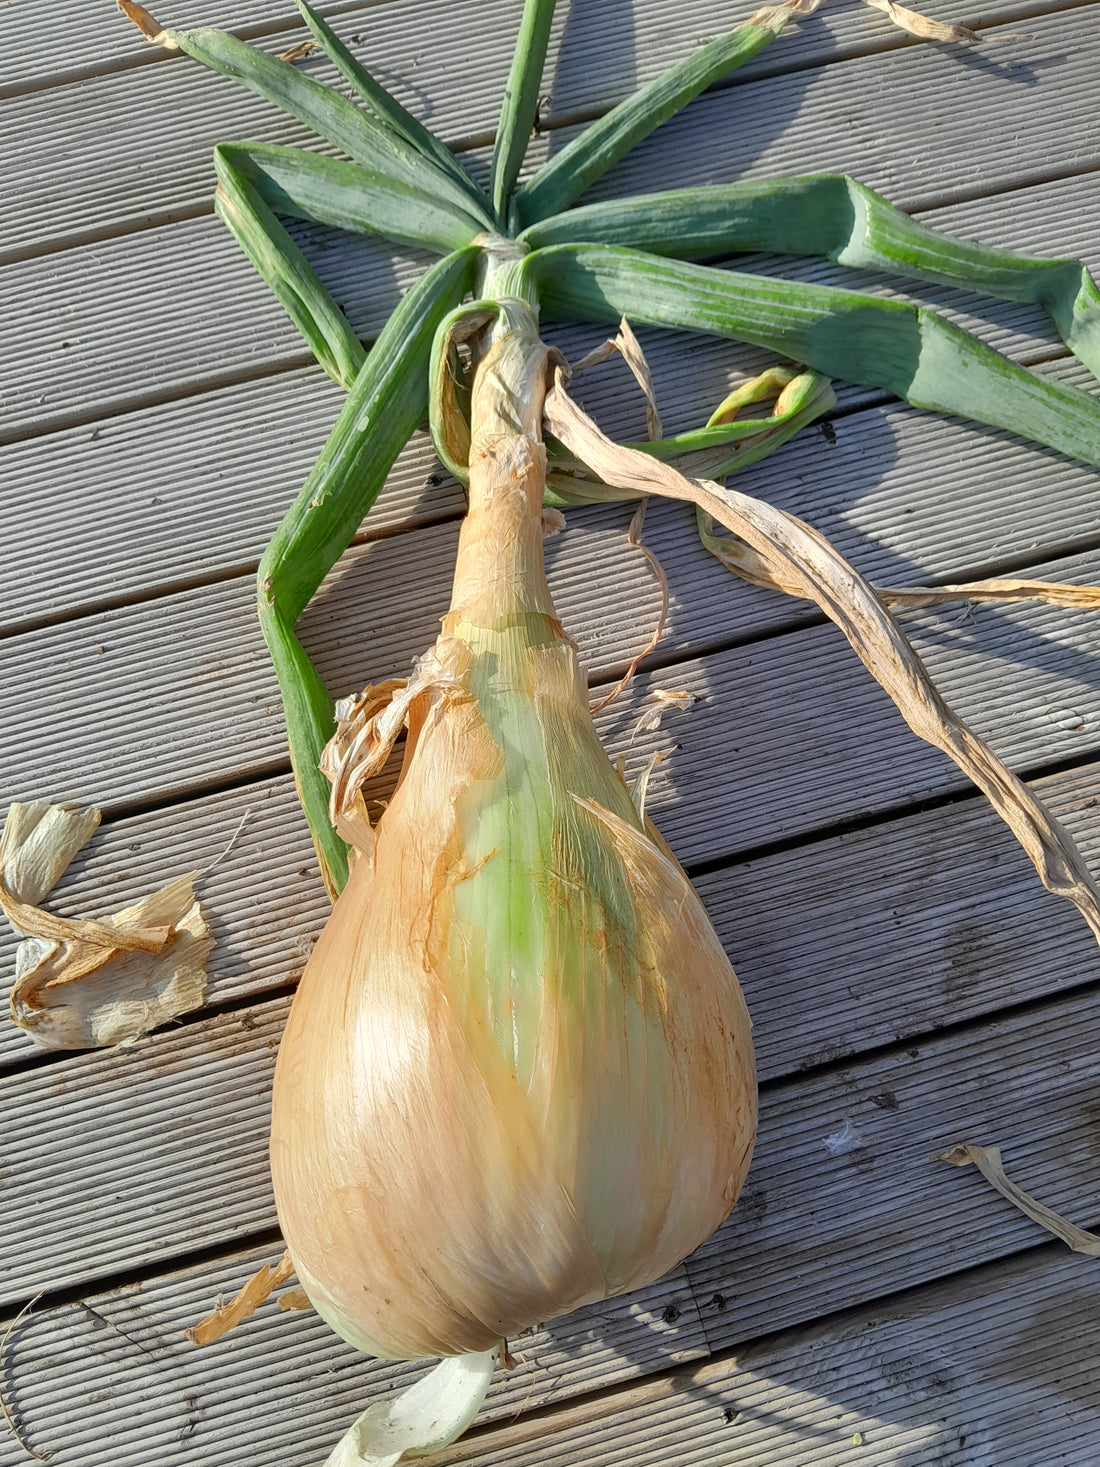 Giant Vegetables - It all starts early with Onions